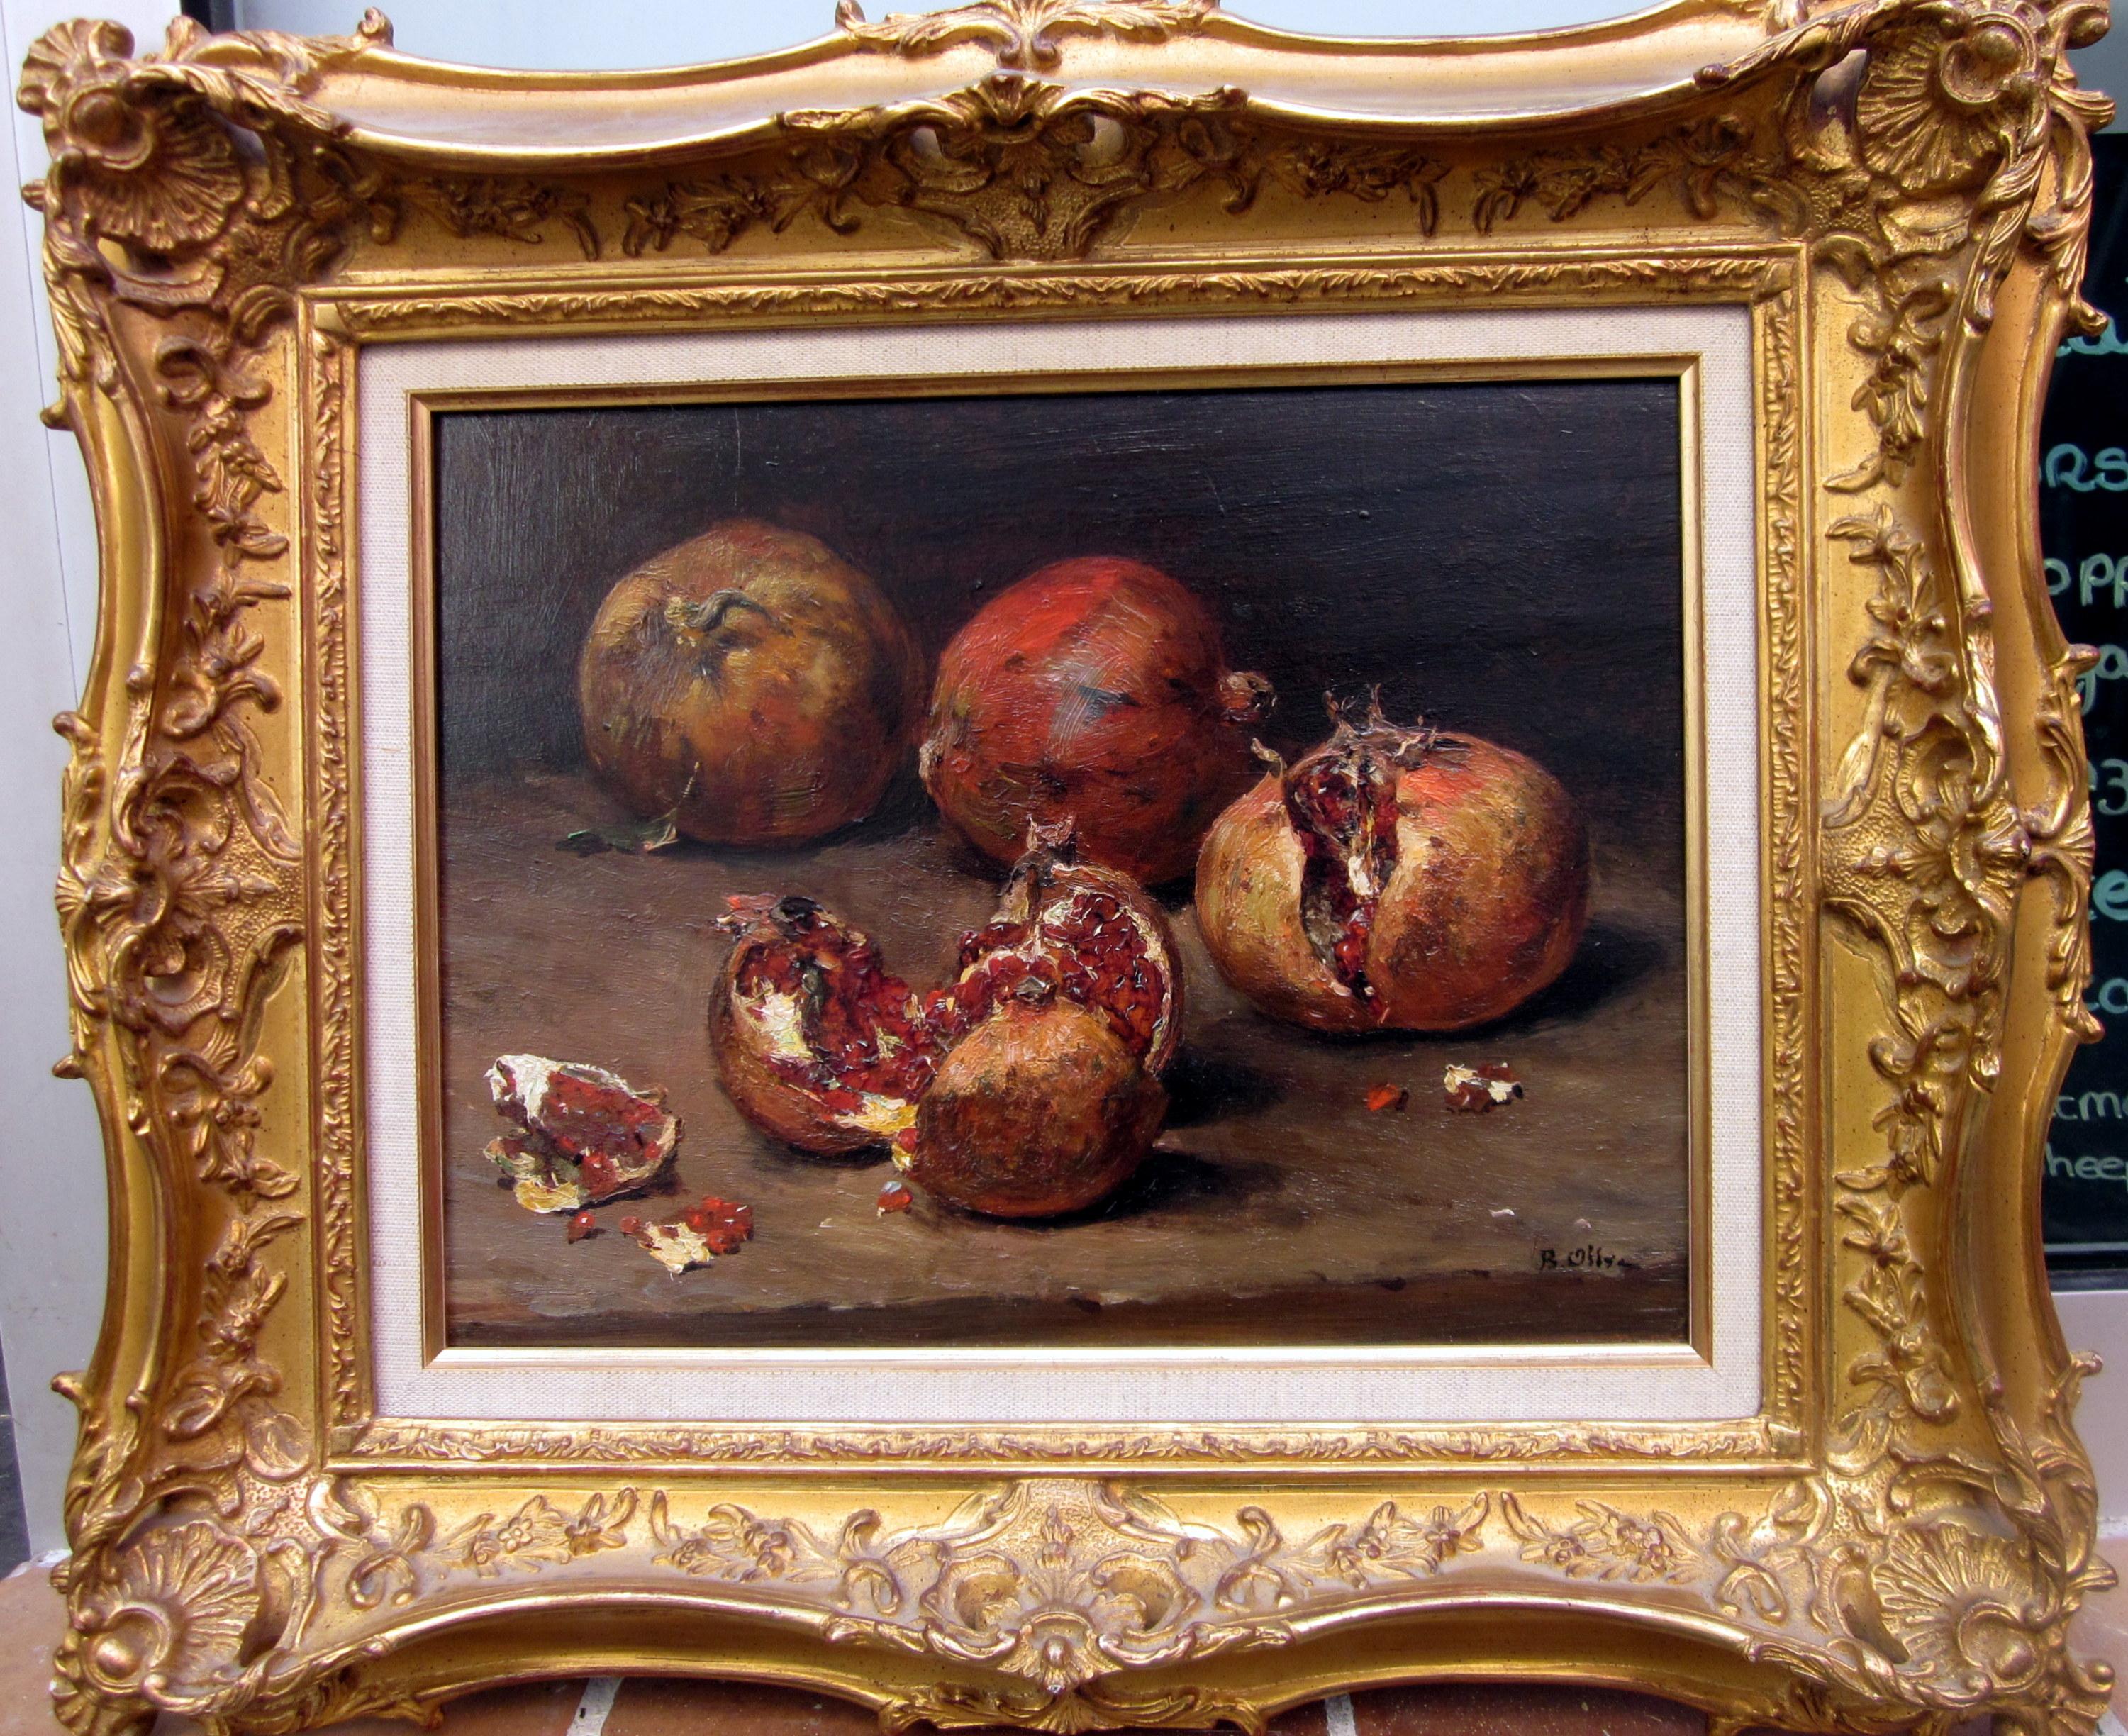 Jean-Baptiste Olive (1848-1936) - Pomegranate still life painting
Oil on panel

A superb, delicate and refined still life painting by the Marseille master Jean-Baptiste Olive. The work is in excellent condition, measures 27cm per 35cm, in a